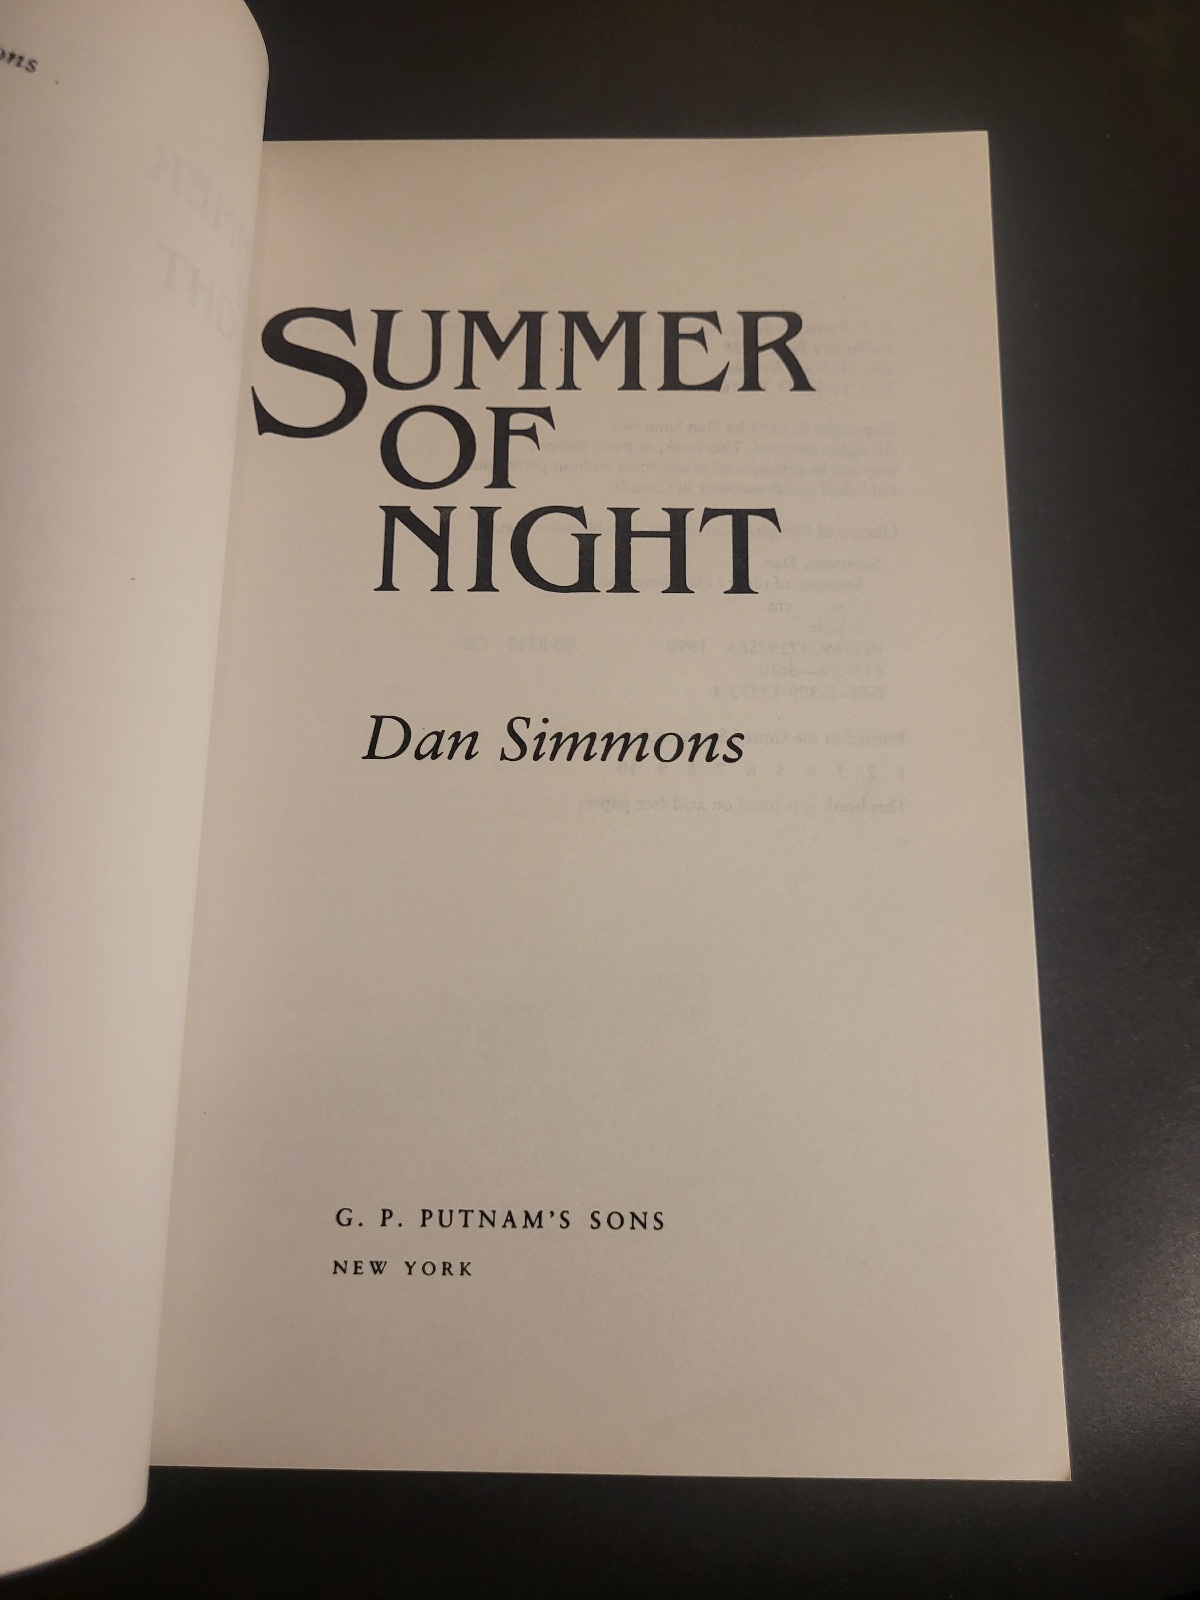 Summer of Night by Dan Simmons Uncorrected Proof 1991